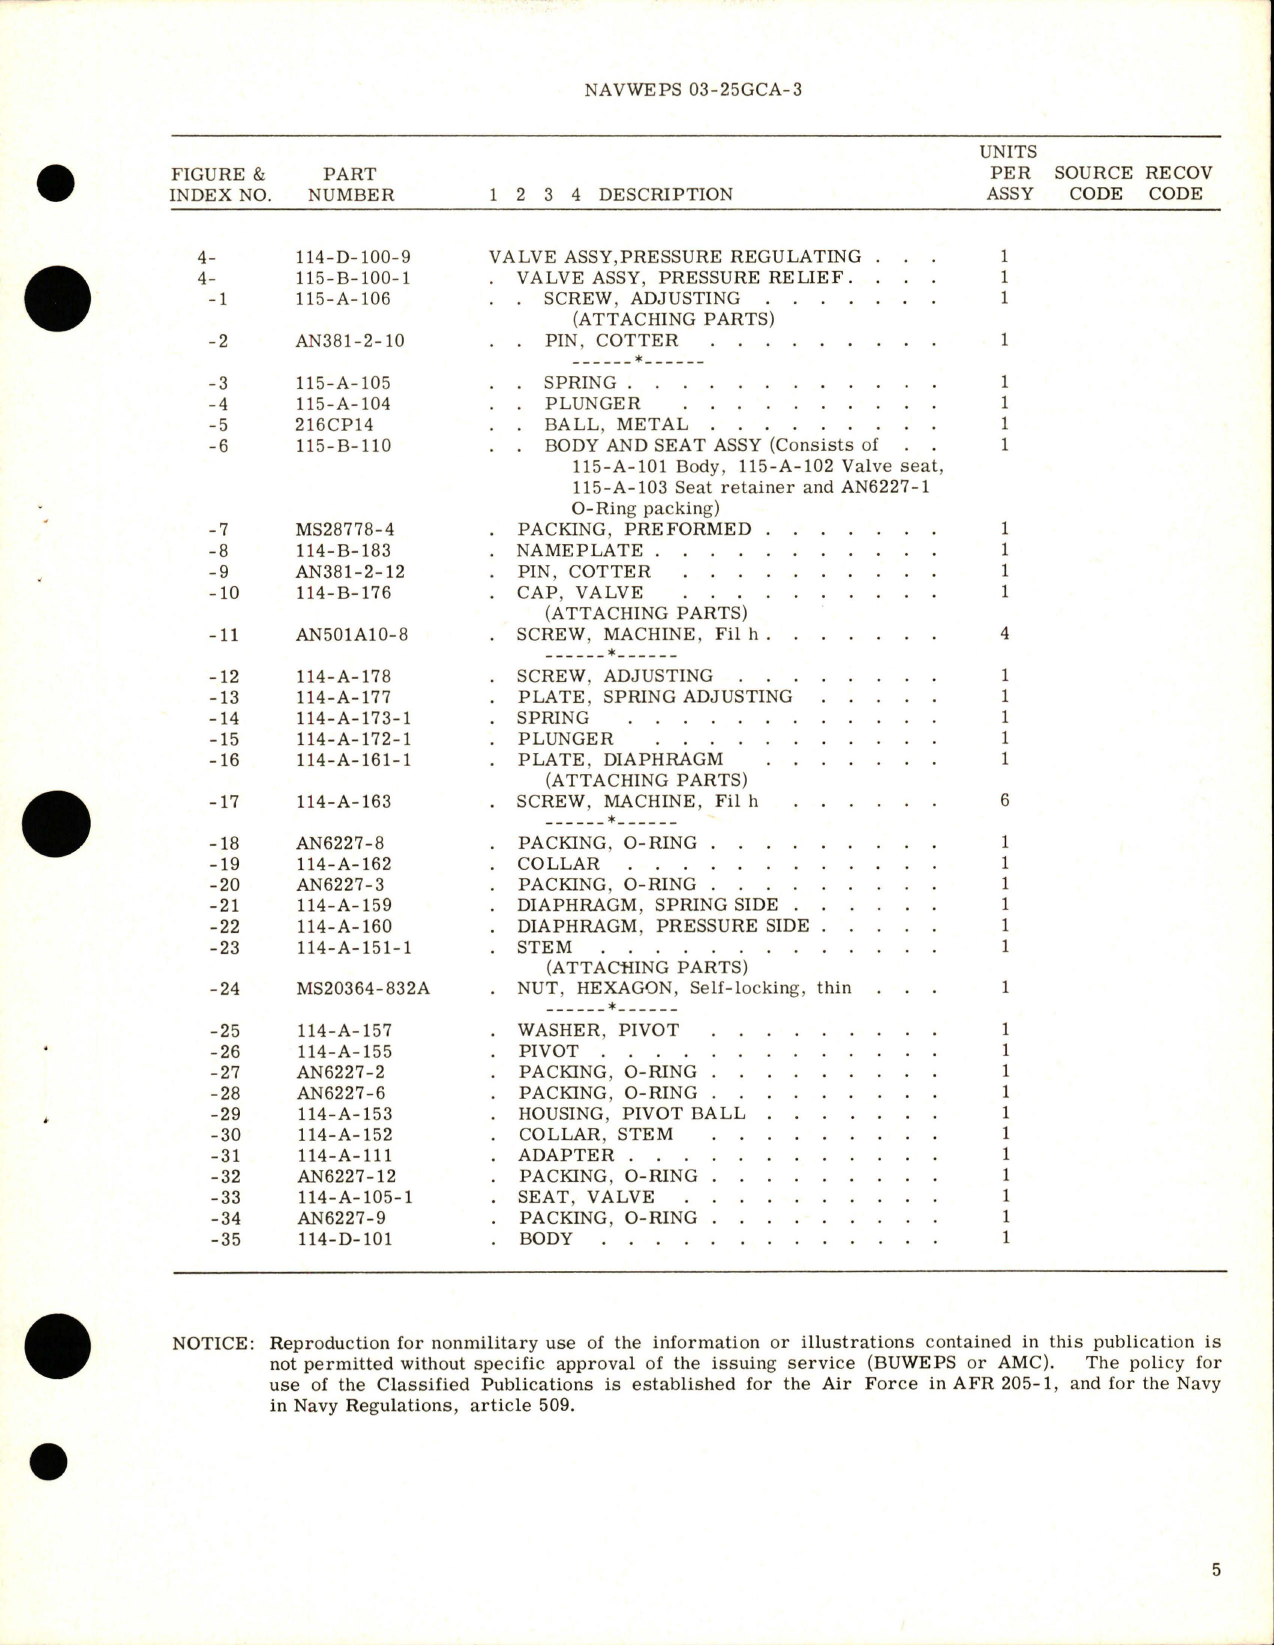 Sample page 5 from AirCorps Library document: Overhaul Instructions with Parts Breakdown for Pressure Regulating Valve Assembly - Model 114-D-100-9 